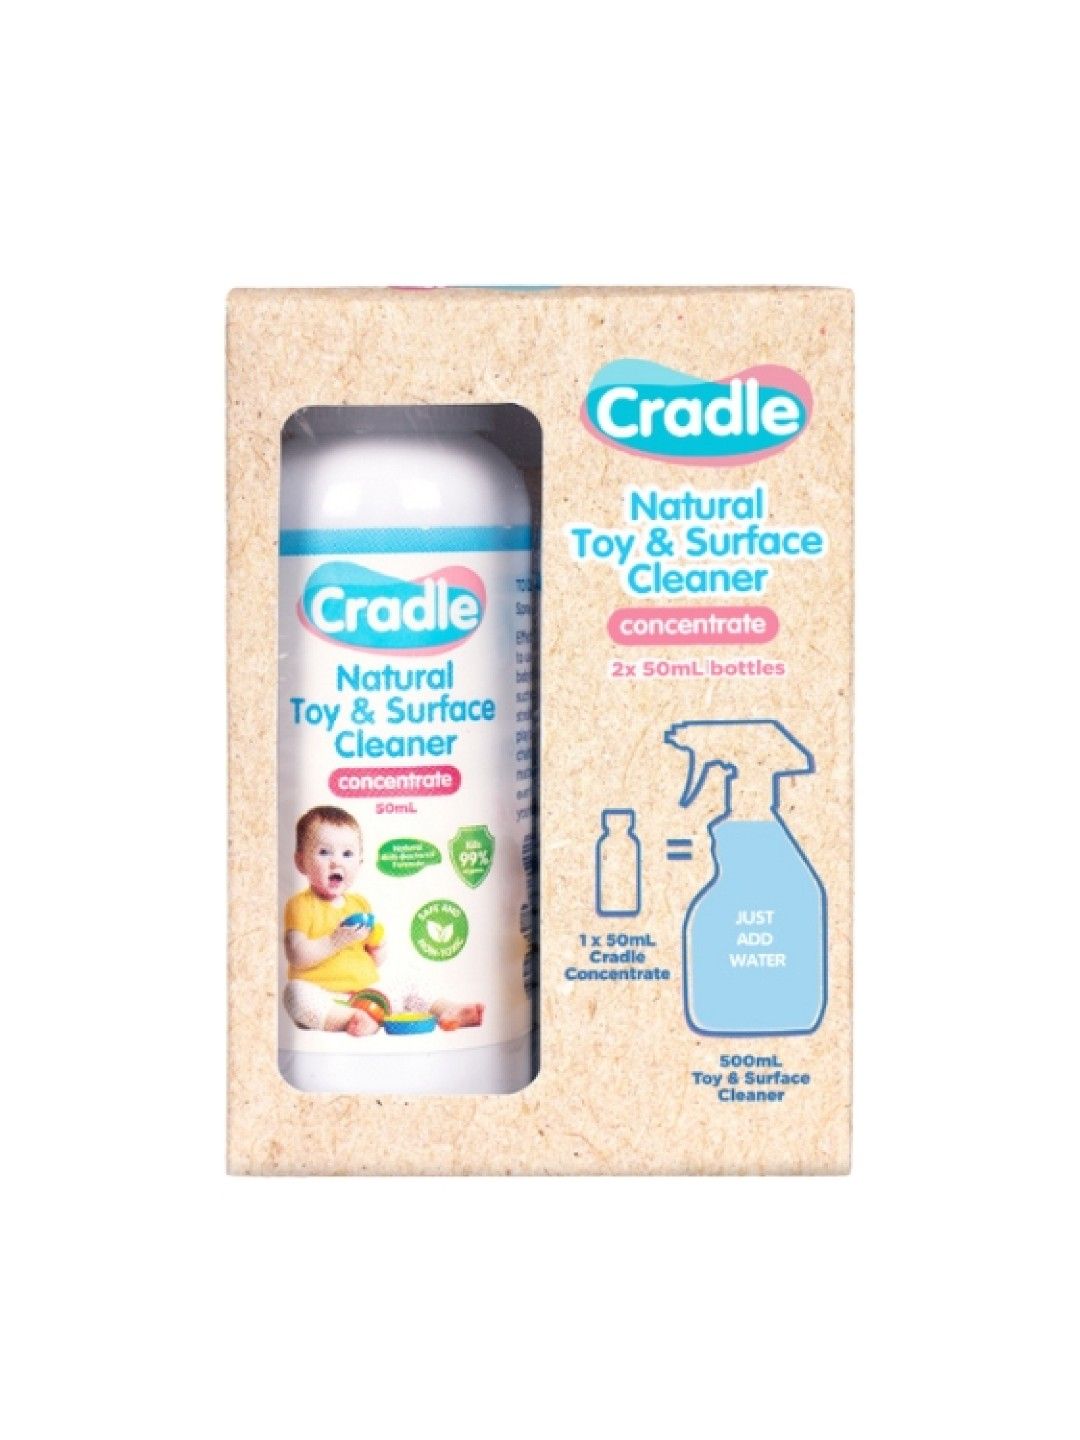 Cradle Natural Toy & Surface Cleaner Concentrate 2 x (50ml)